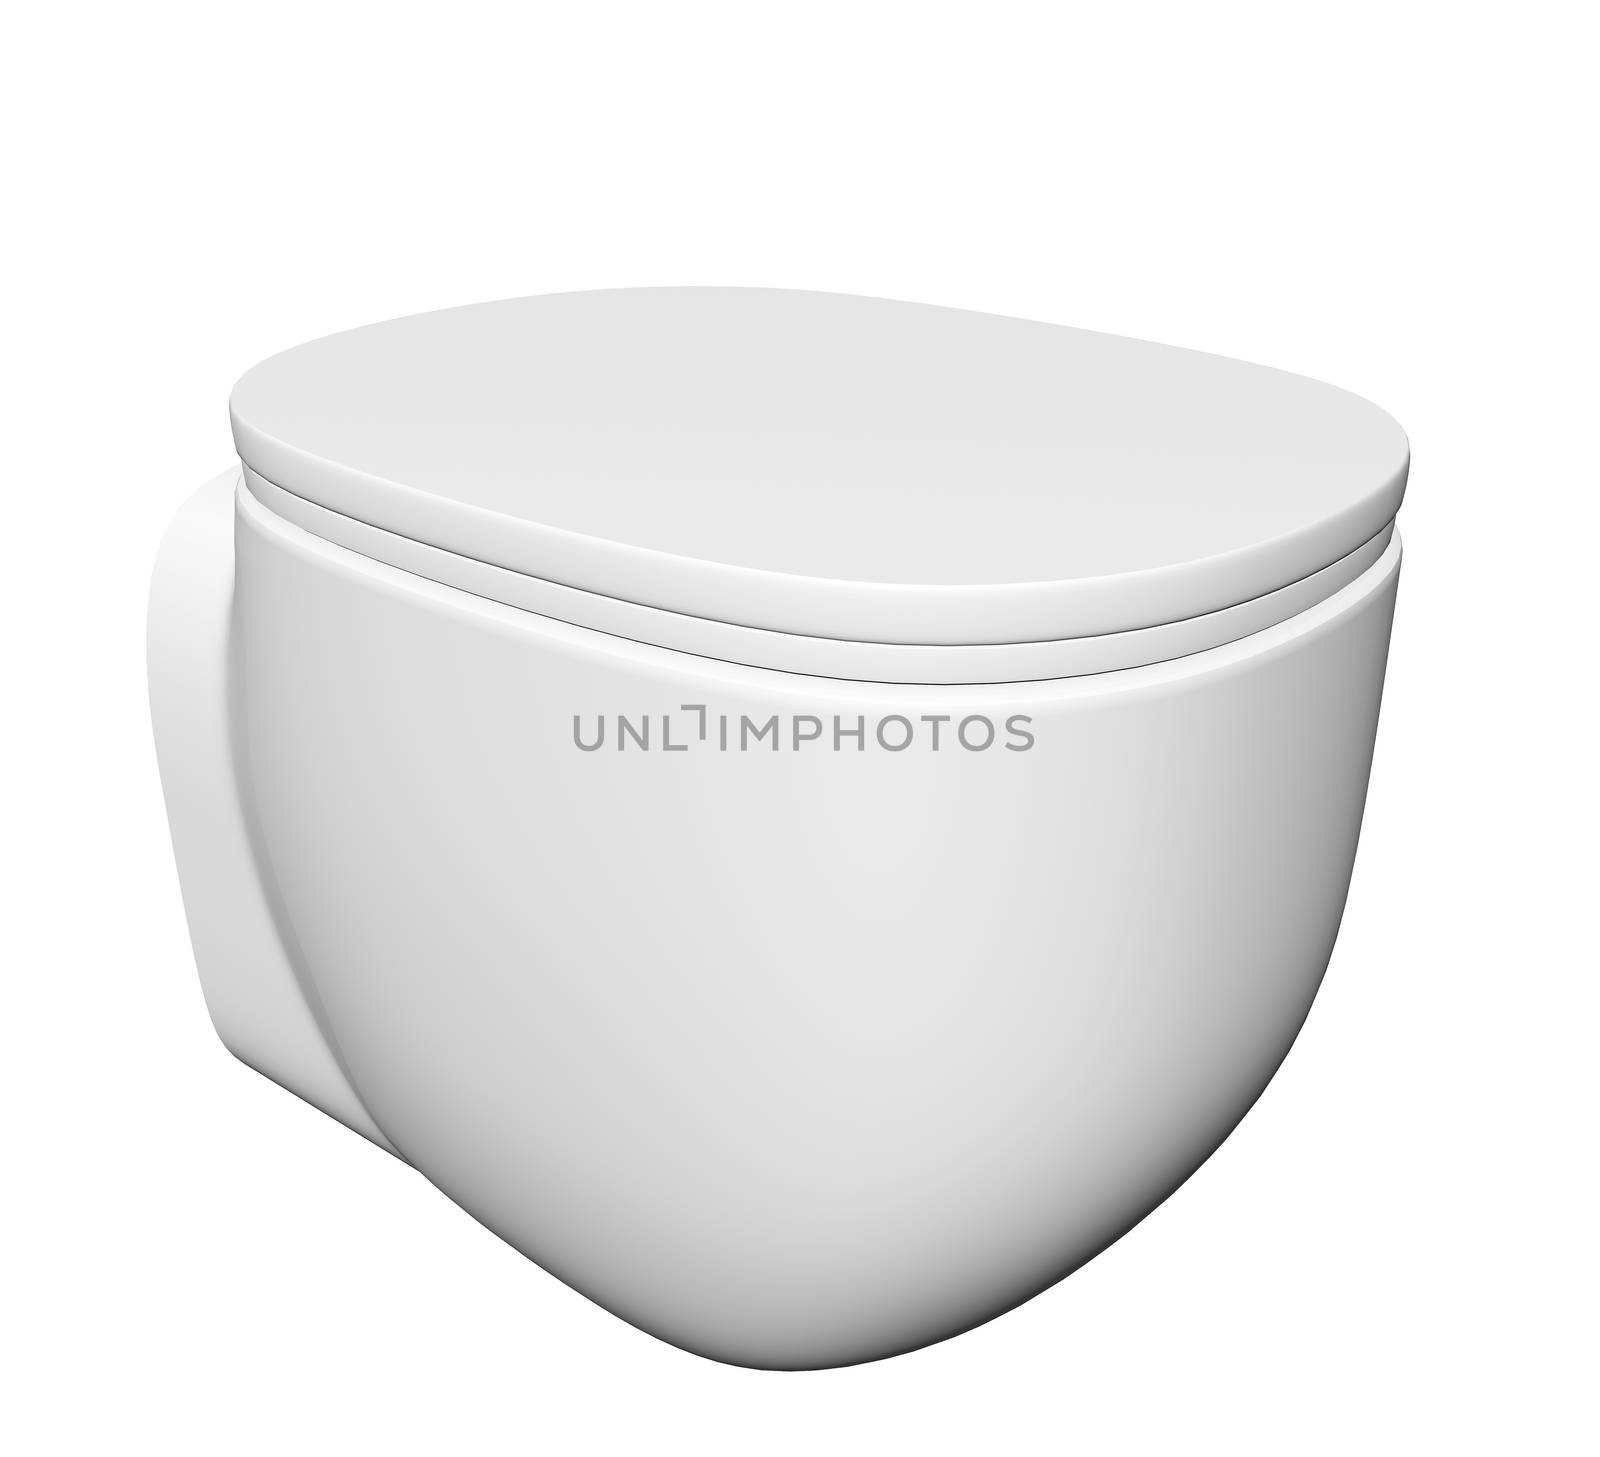 Modern white ceramic and acrylic toilet bowl and lid, isolated against a white background. 3D illustration